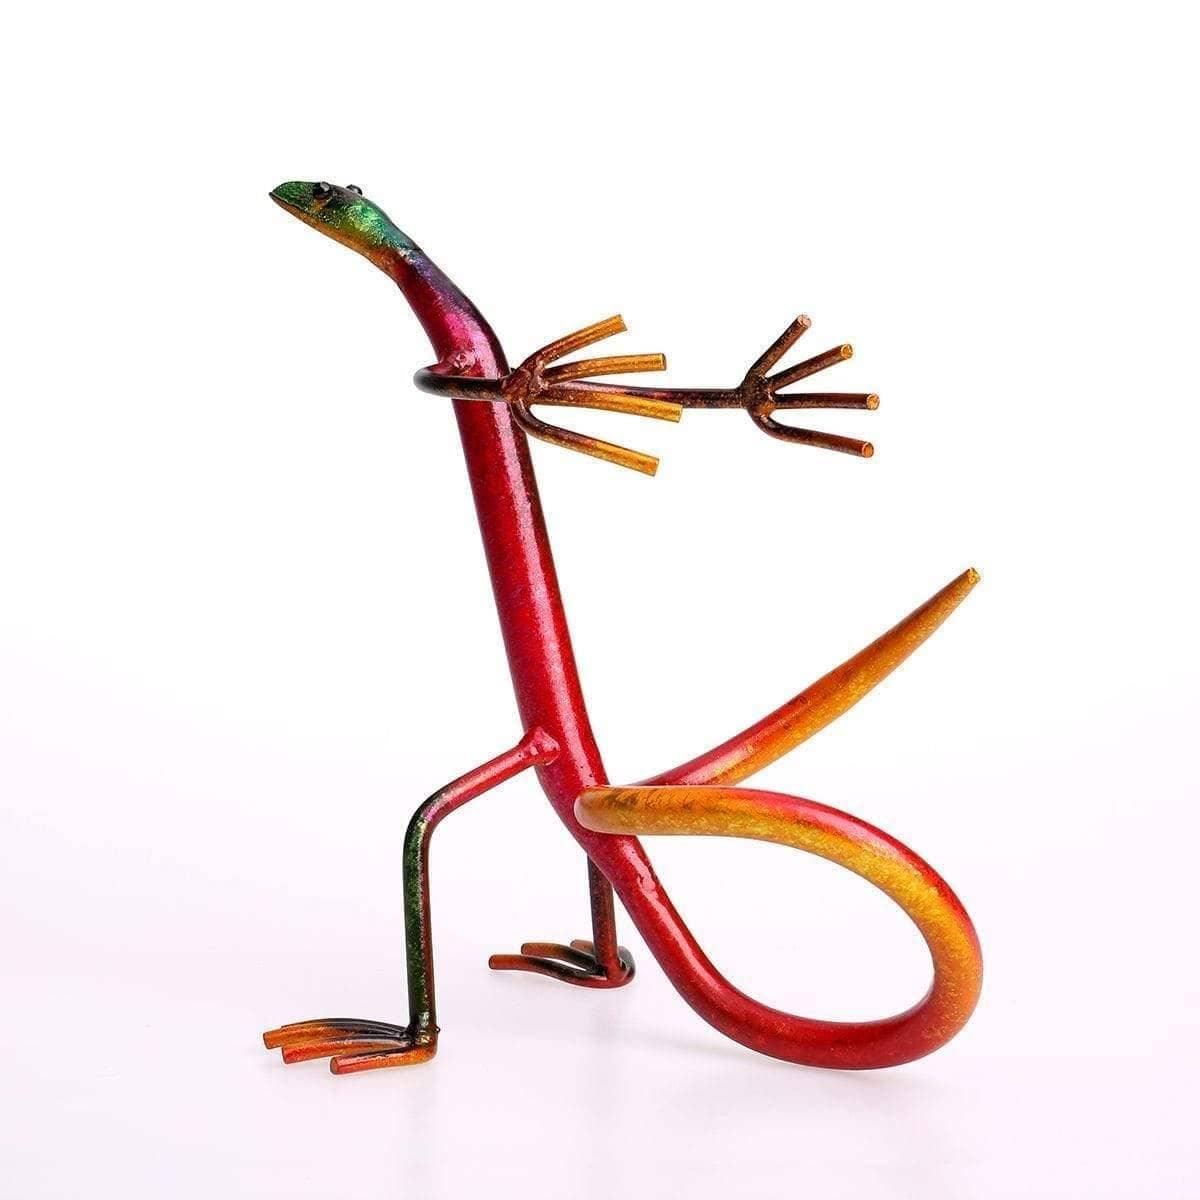 Gecko Wine Bottle Holder: Playful and Whimsical Wine Accessory